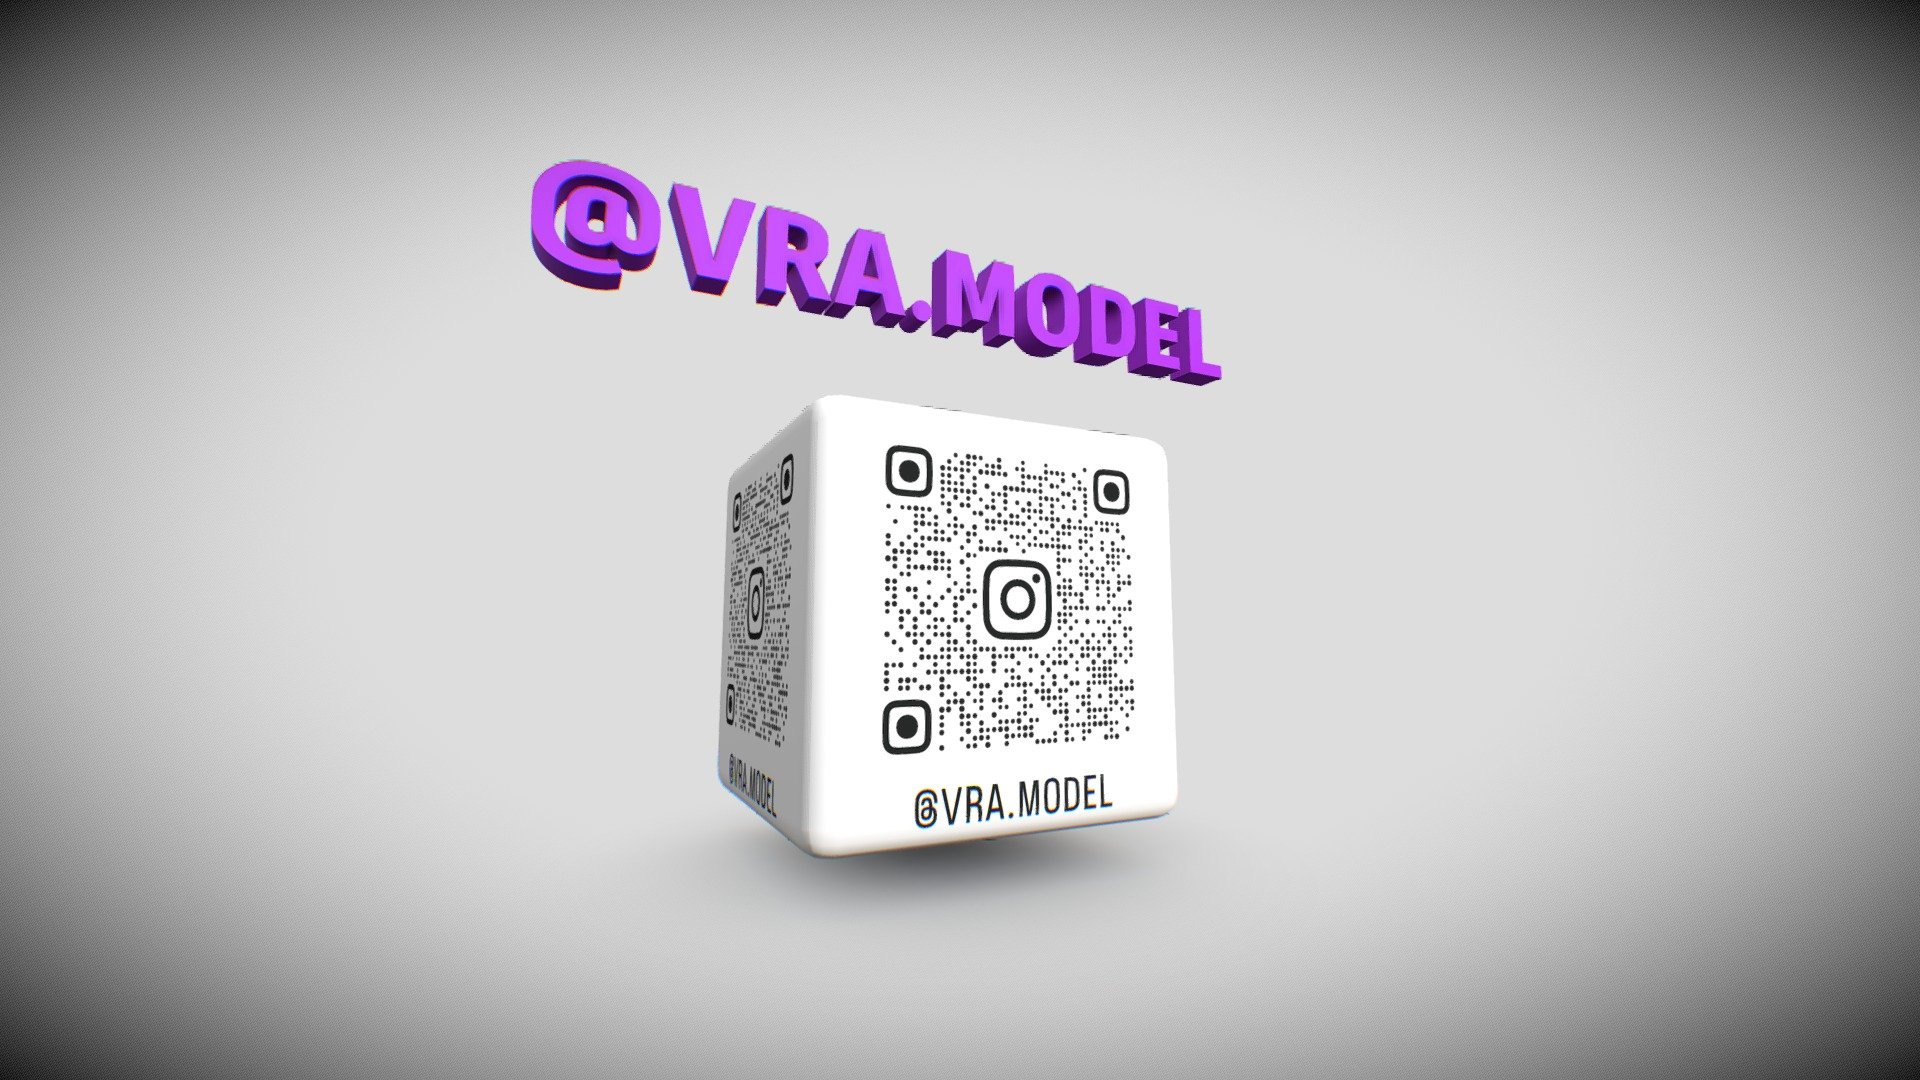 Introducing our instagram profile
TODAY August 14 we created this new account for promoting our models - and you see our models first.
@vra.model - Introducing our instagram profile - Download Free 3D model by VRA (@architect47) 3d model